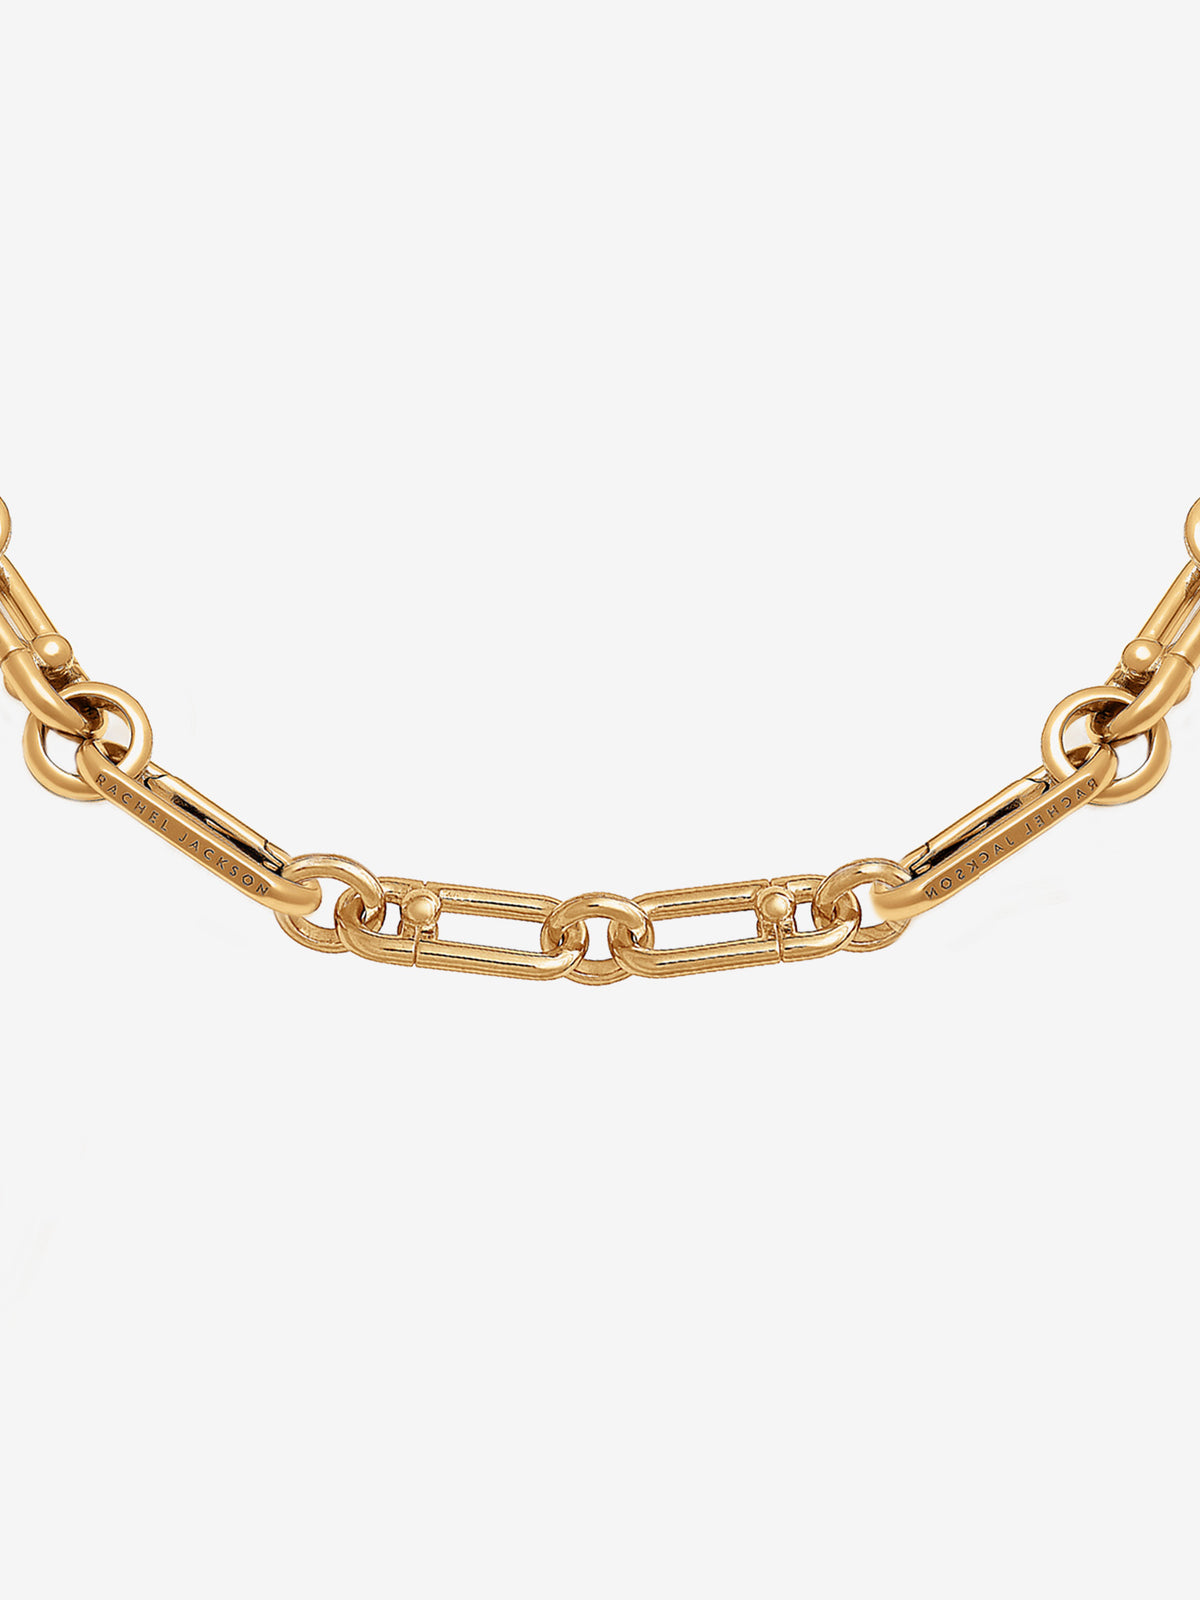 Stellar Chunky Hardware Necklace Extender Chain